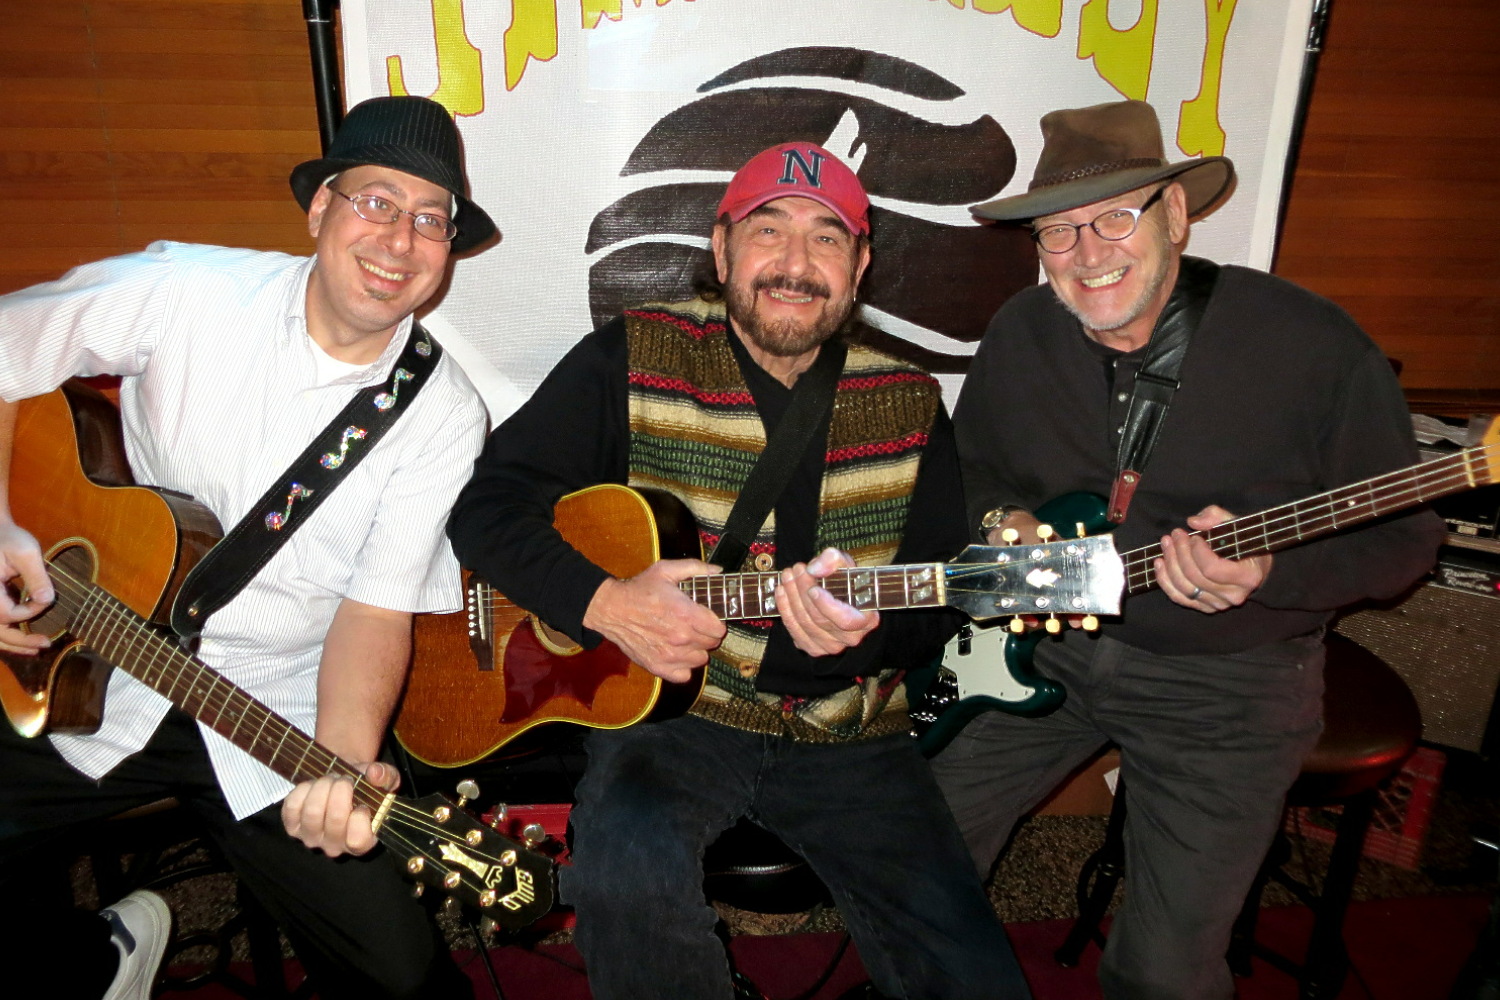 Live Music at Park Place in Leigh, Nebraska - 
						Northeast Nebraska Musicians The Jim Casey Trio, 
						Jim Casey, Don Petersen, & Matt Casey 
						performing live at 						 
						Park Place in Leigh, Nebraska  
						on Saturday, January 9, 2016. 
						Park Place is located at 
						130 Road V, 
						Leigh, NE 68643, 
						Phone: (402) 487-2721.